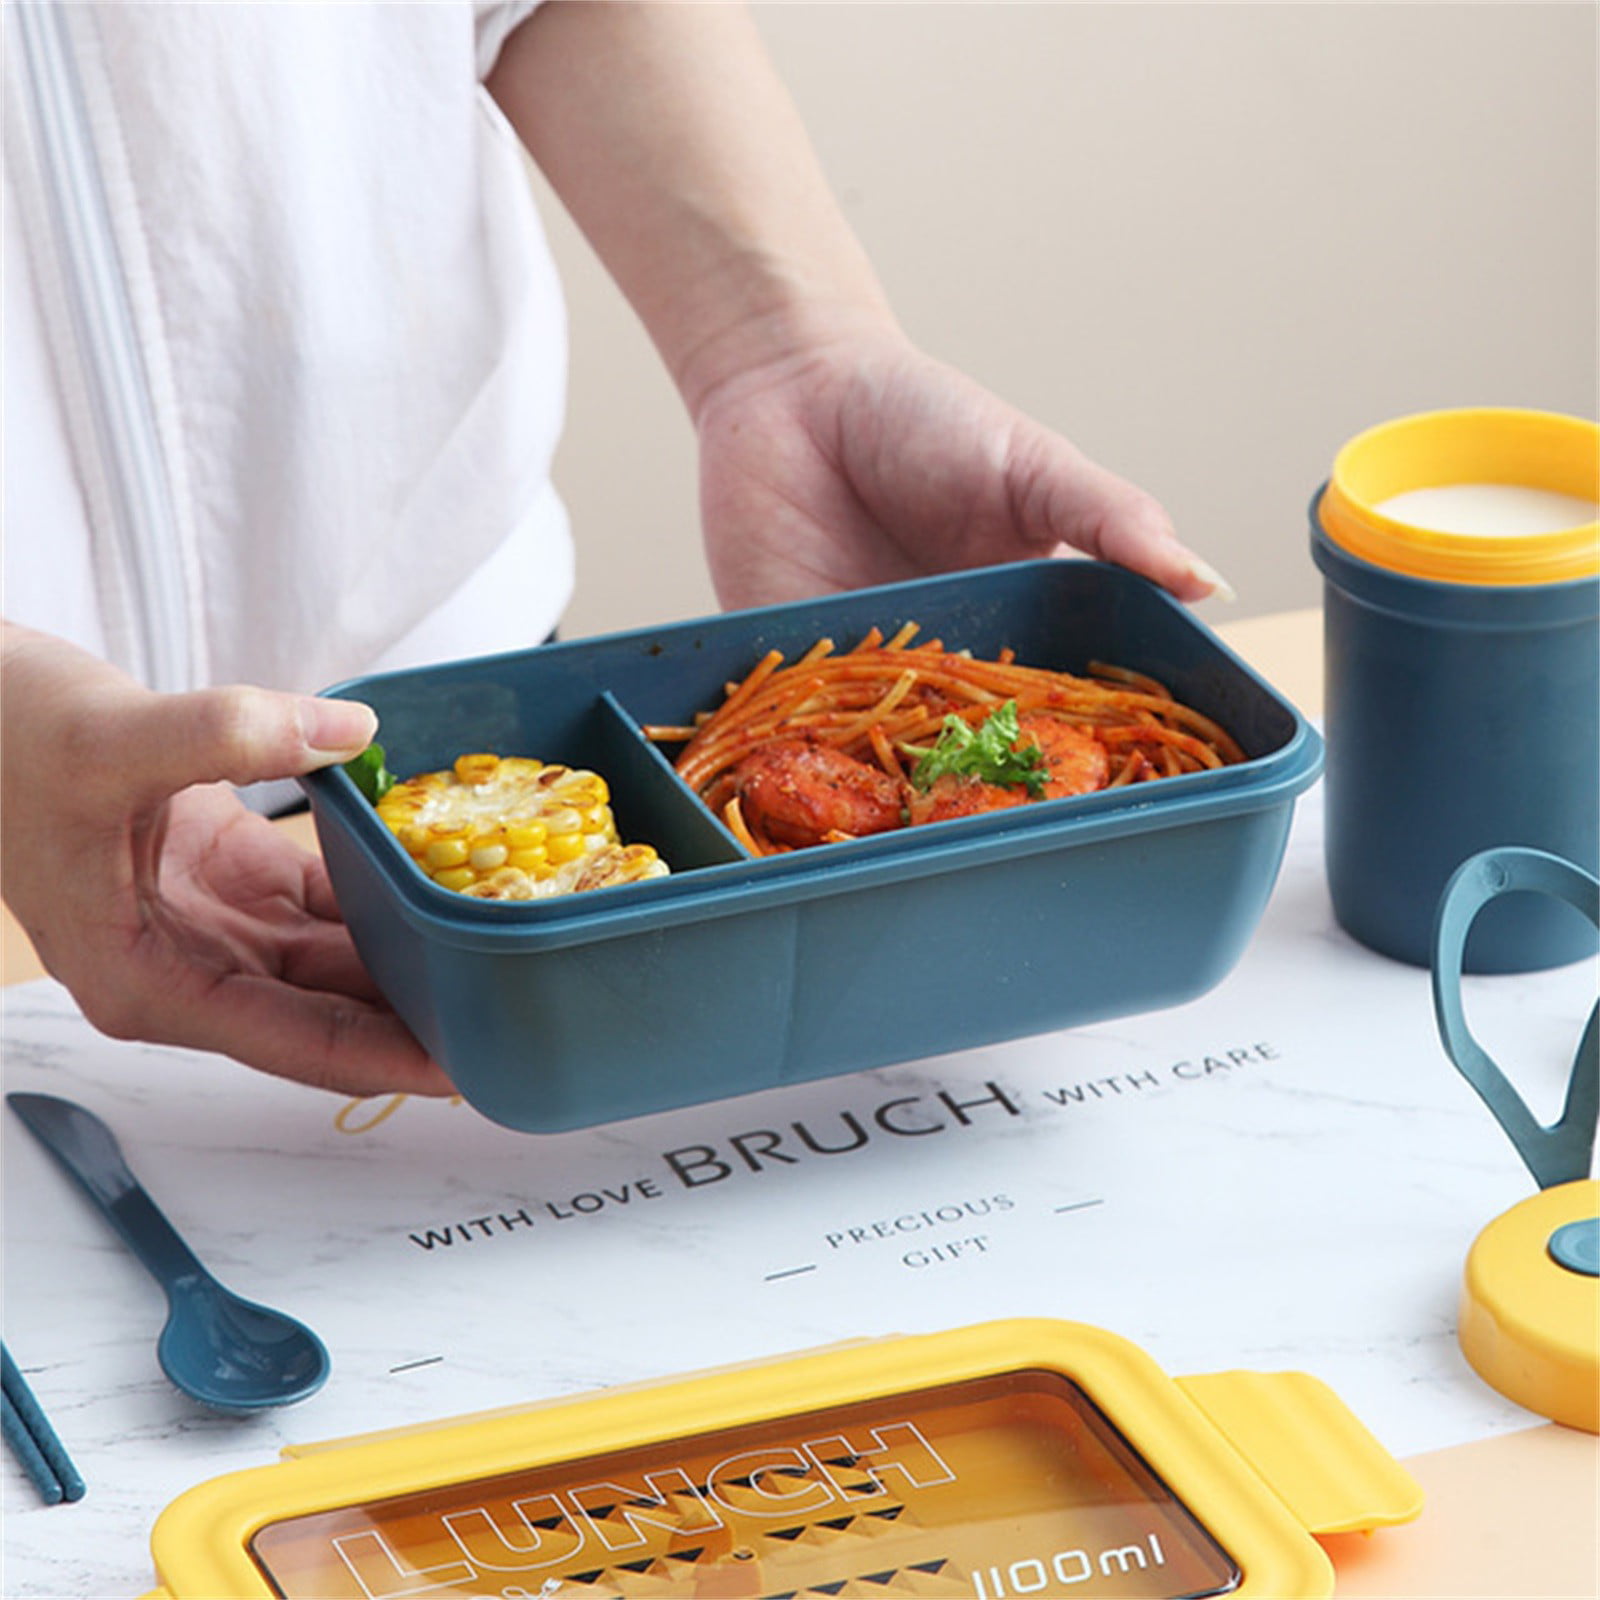 Stainless Steel Lunch box - MB Sense - Stainless Steel Bento Box